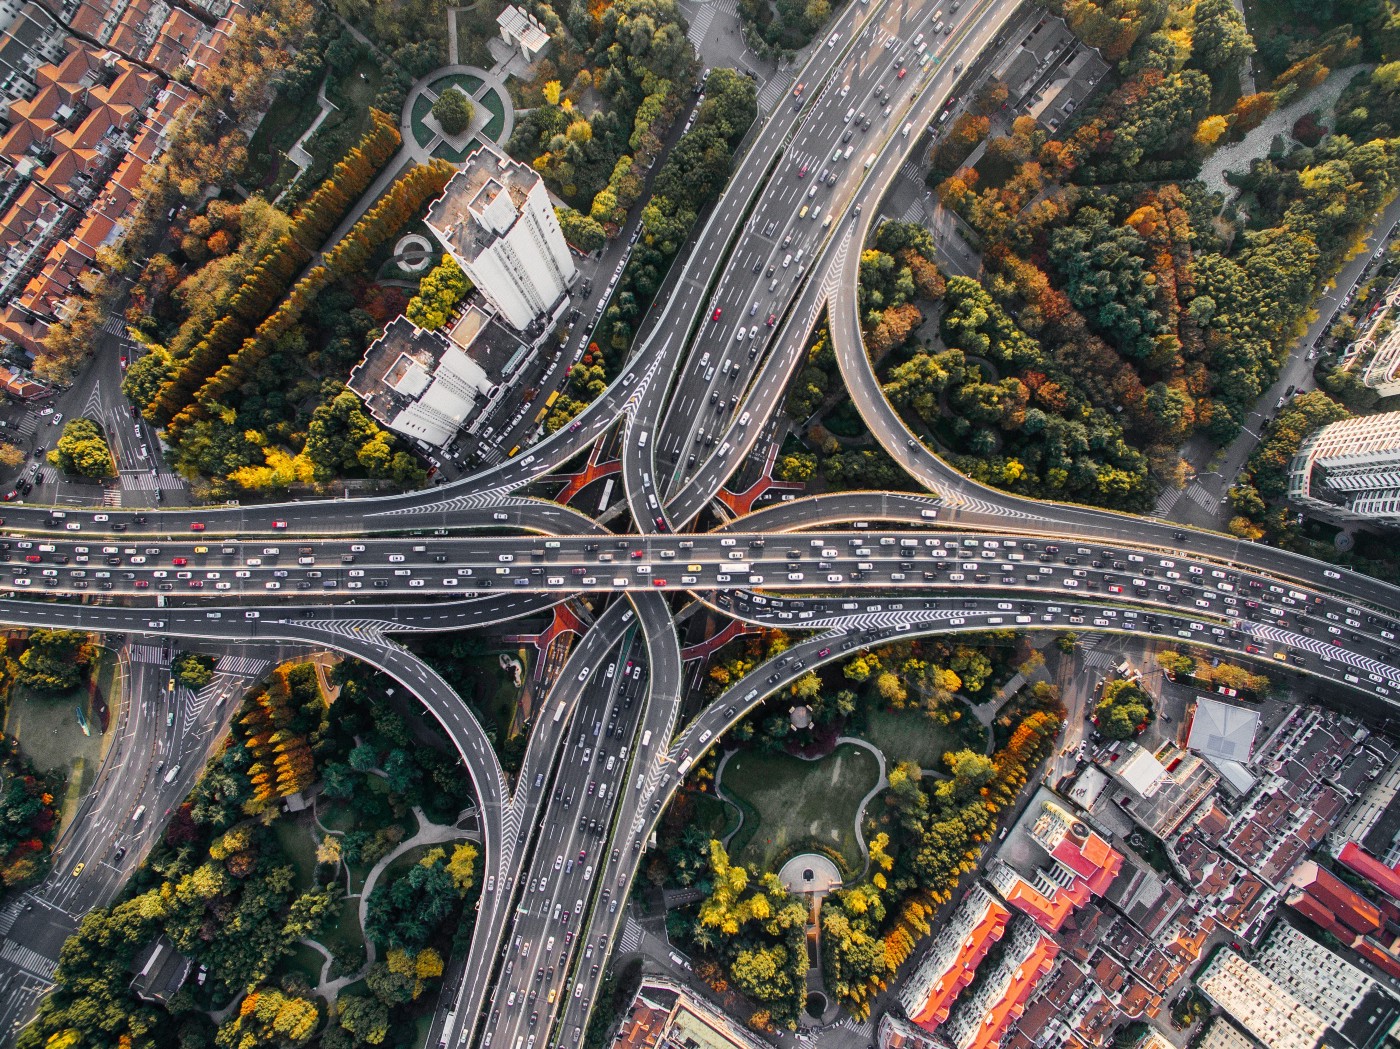 Image of an interstate interchage from above